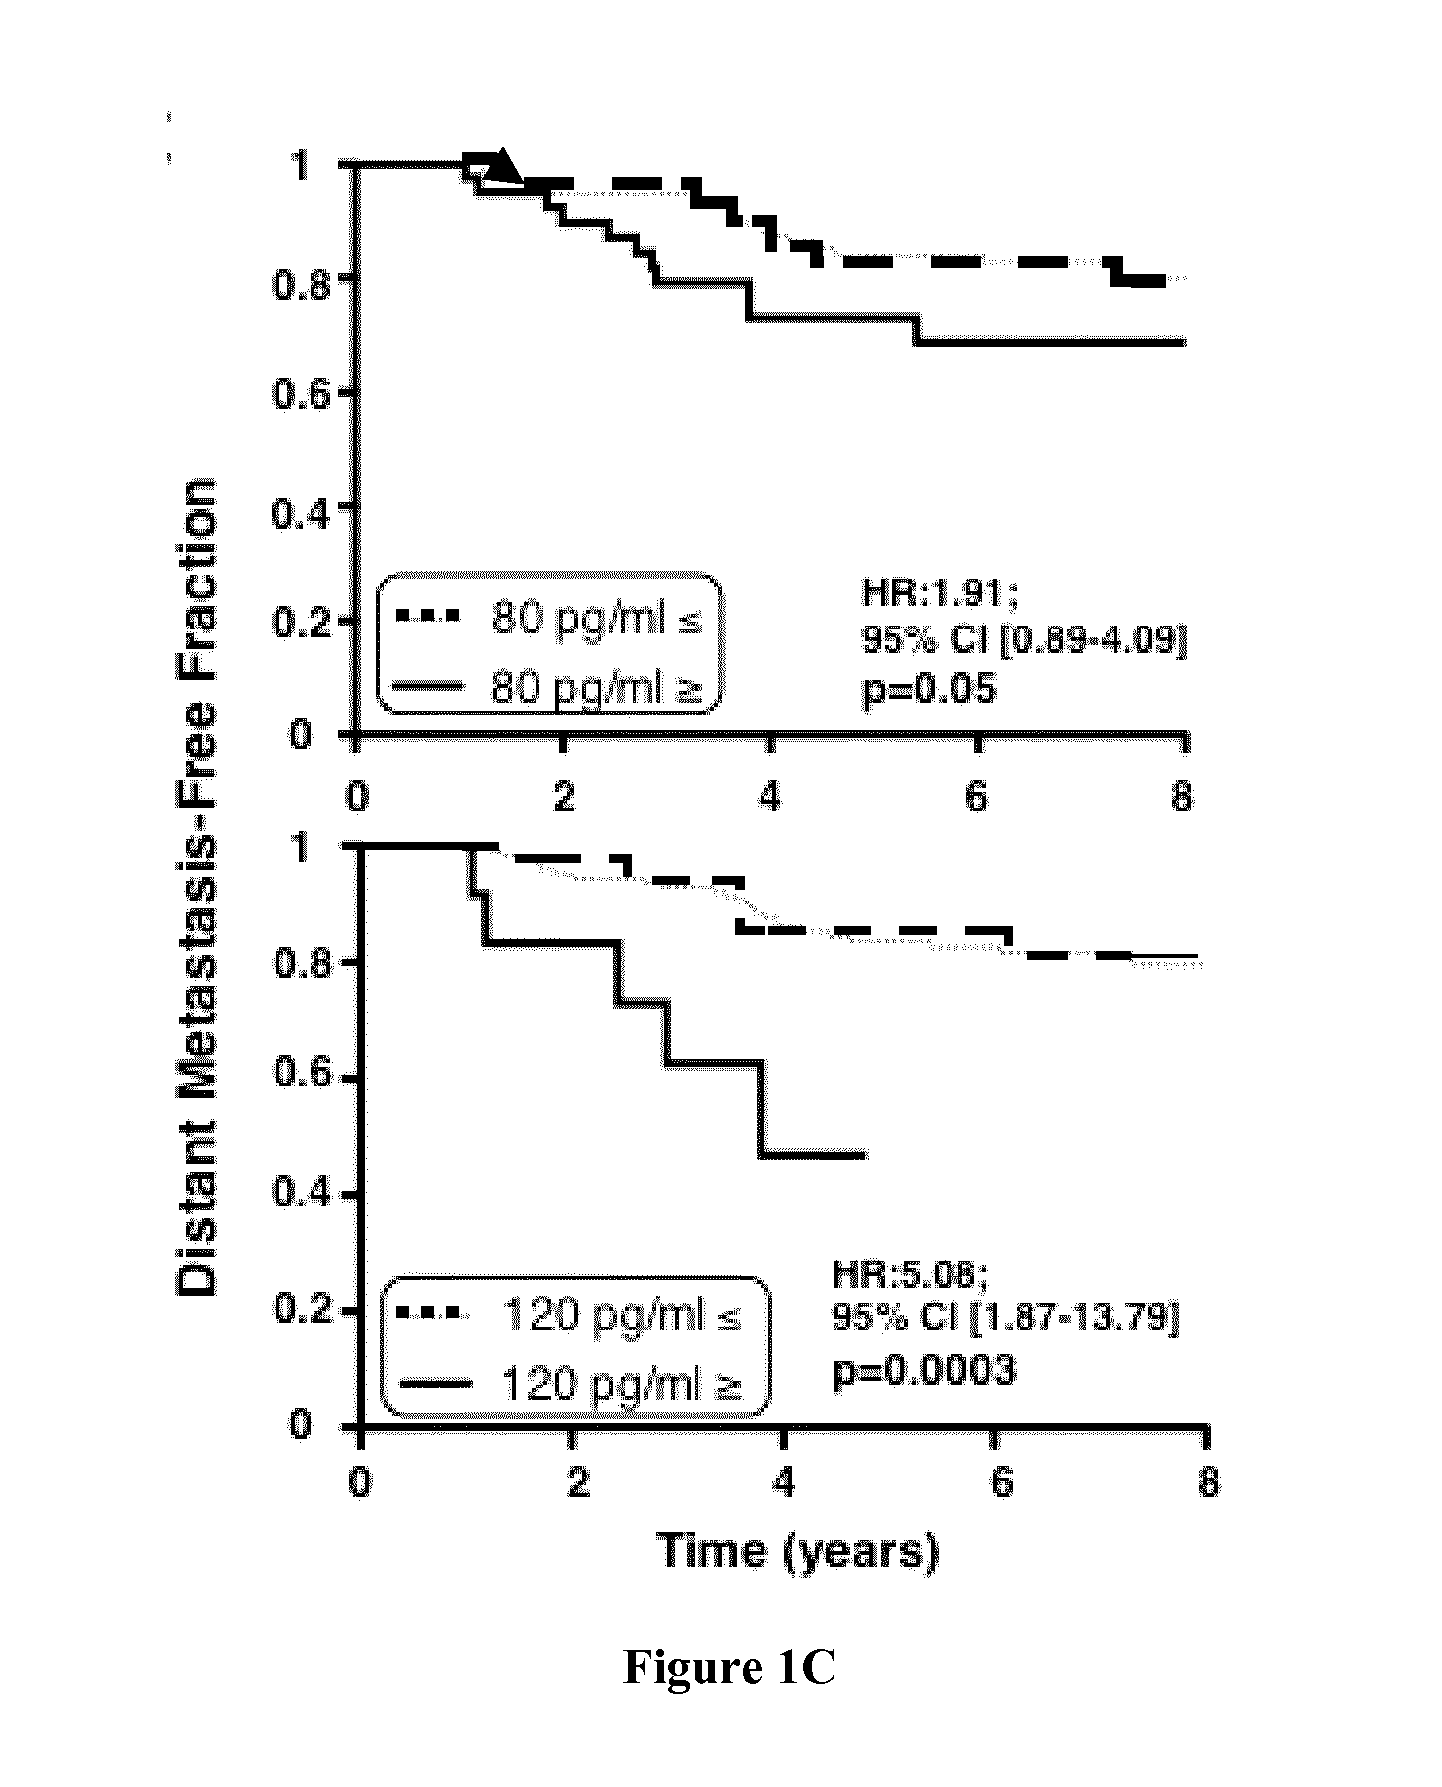 Methods for Predicting and Preventing Metastasis in Triple Negative Breast Cancers